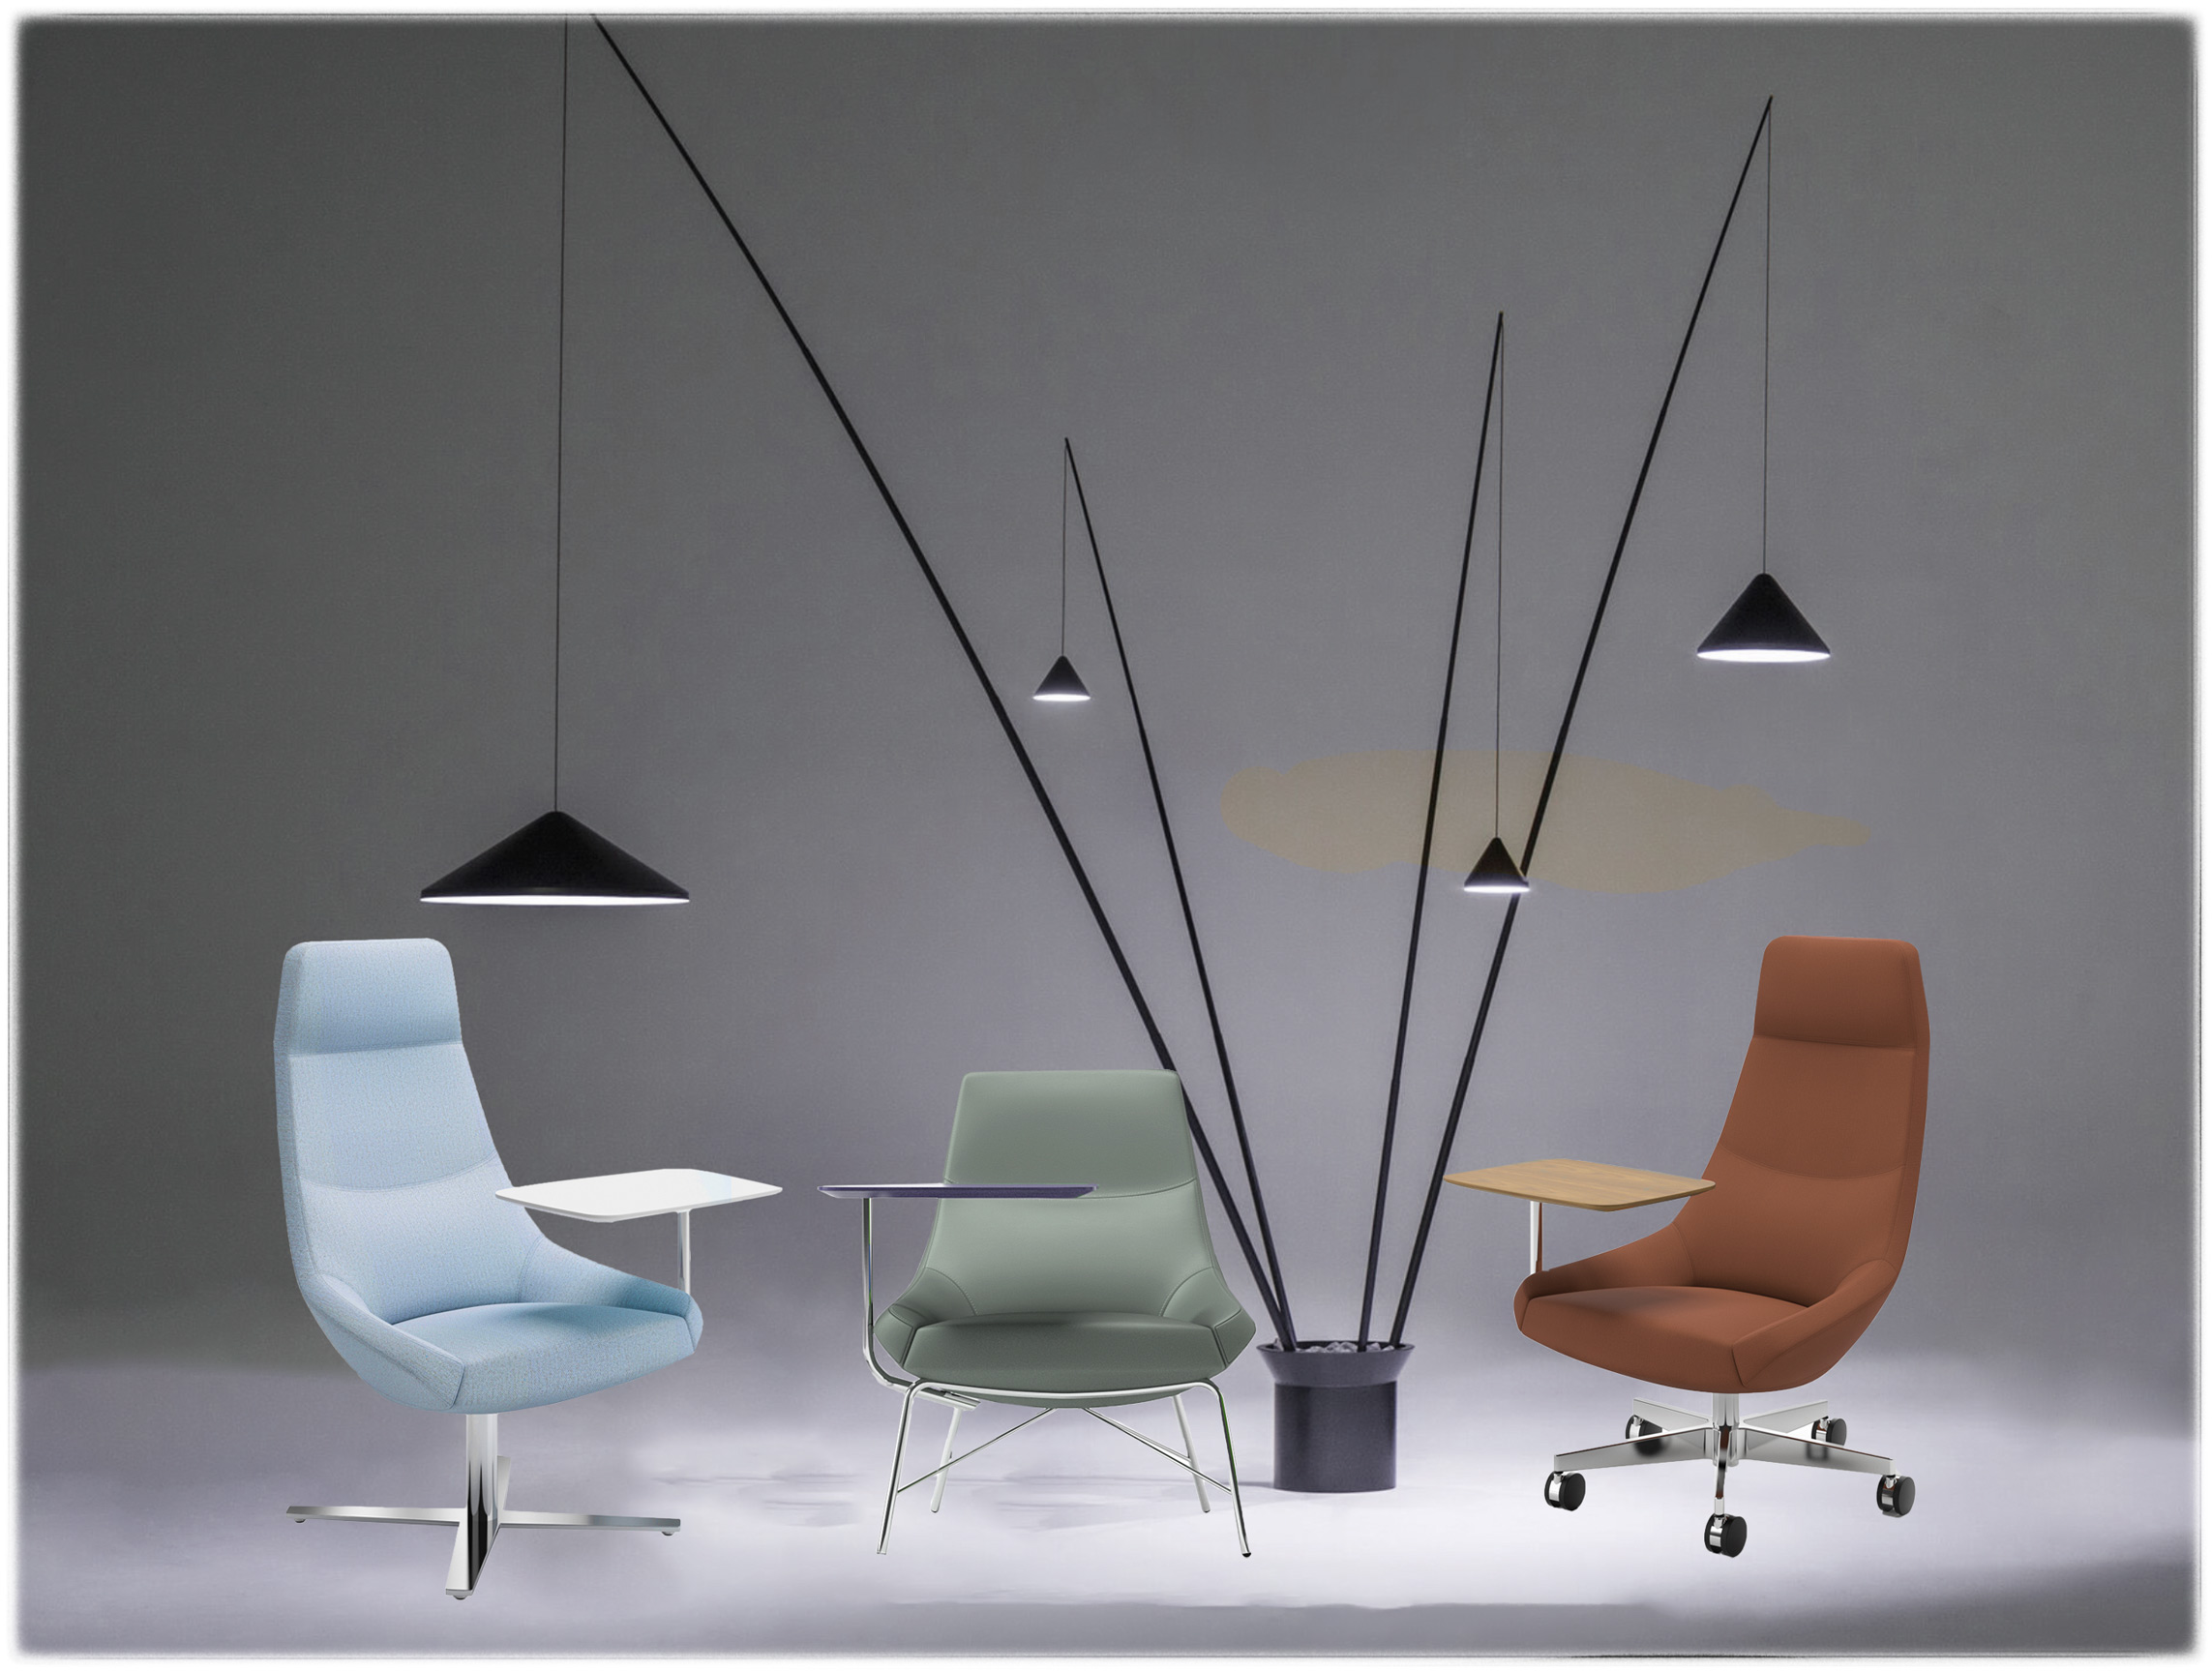 Collaborative Tablet Chair is the ultimate in alternative meeting work spaces